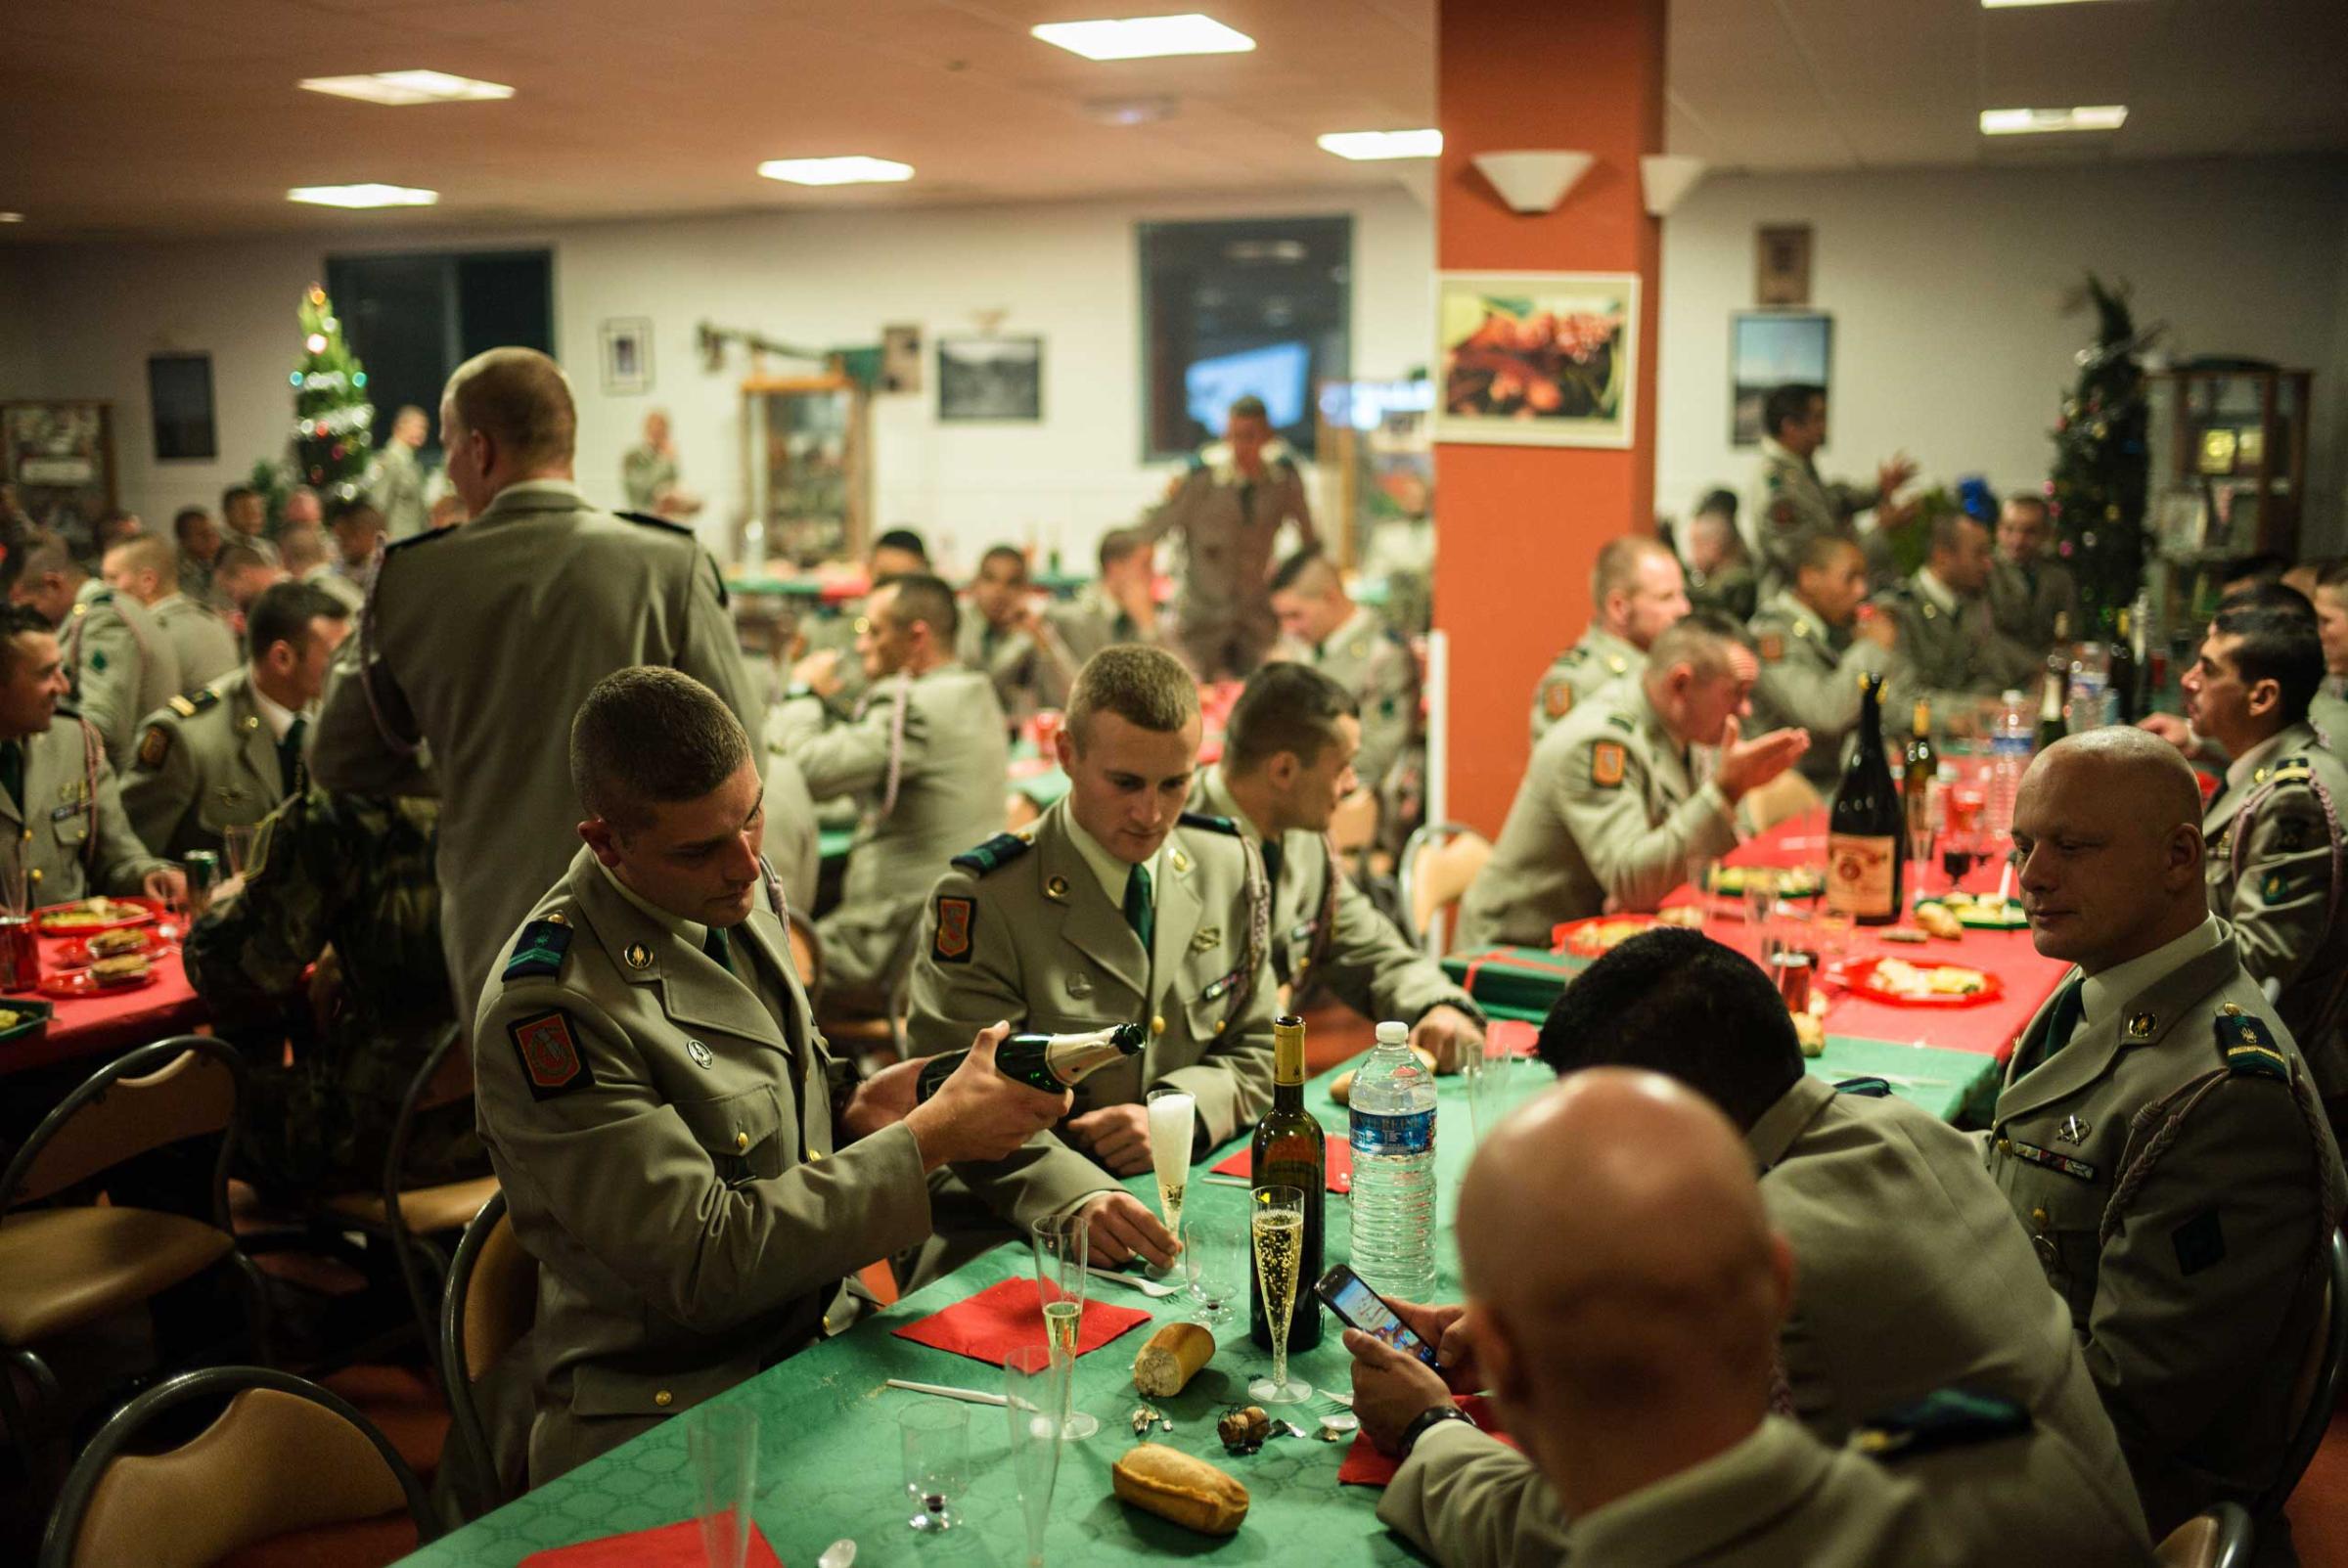 Members of the French Foreign Legion celebrate Christmas.